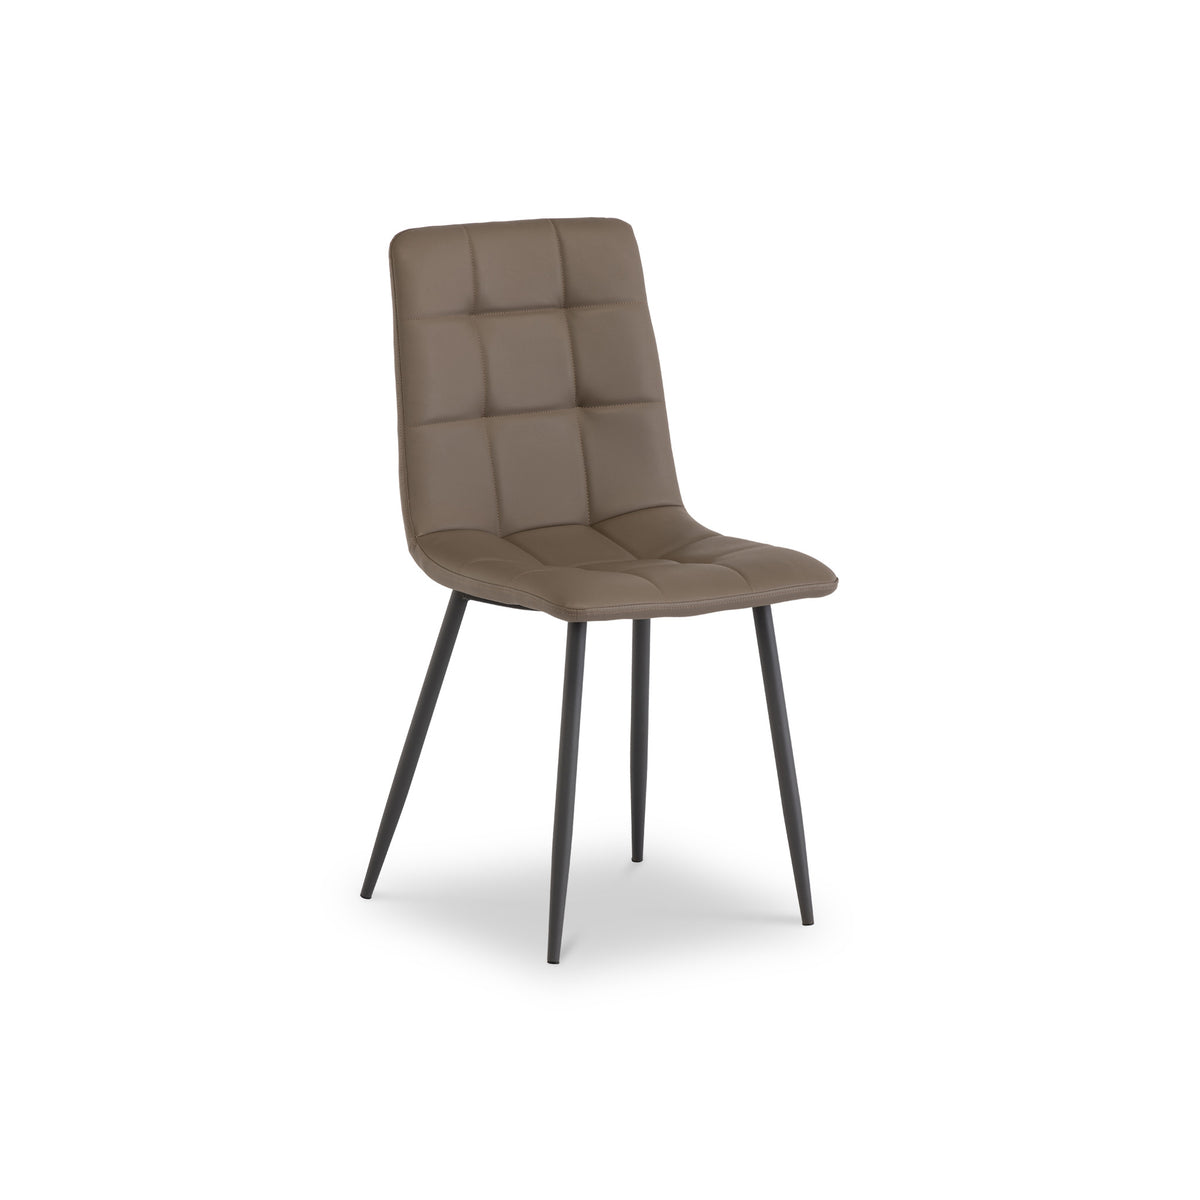  Alis Light Taupe Faux Leather Dining Chair from Roseland Furniture